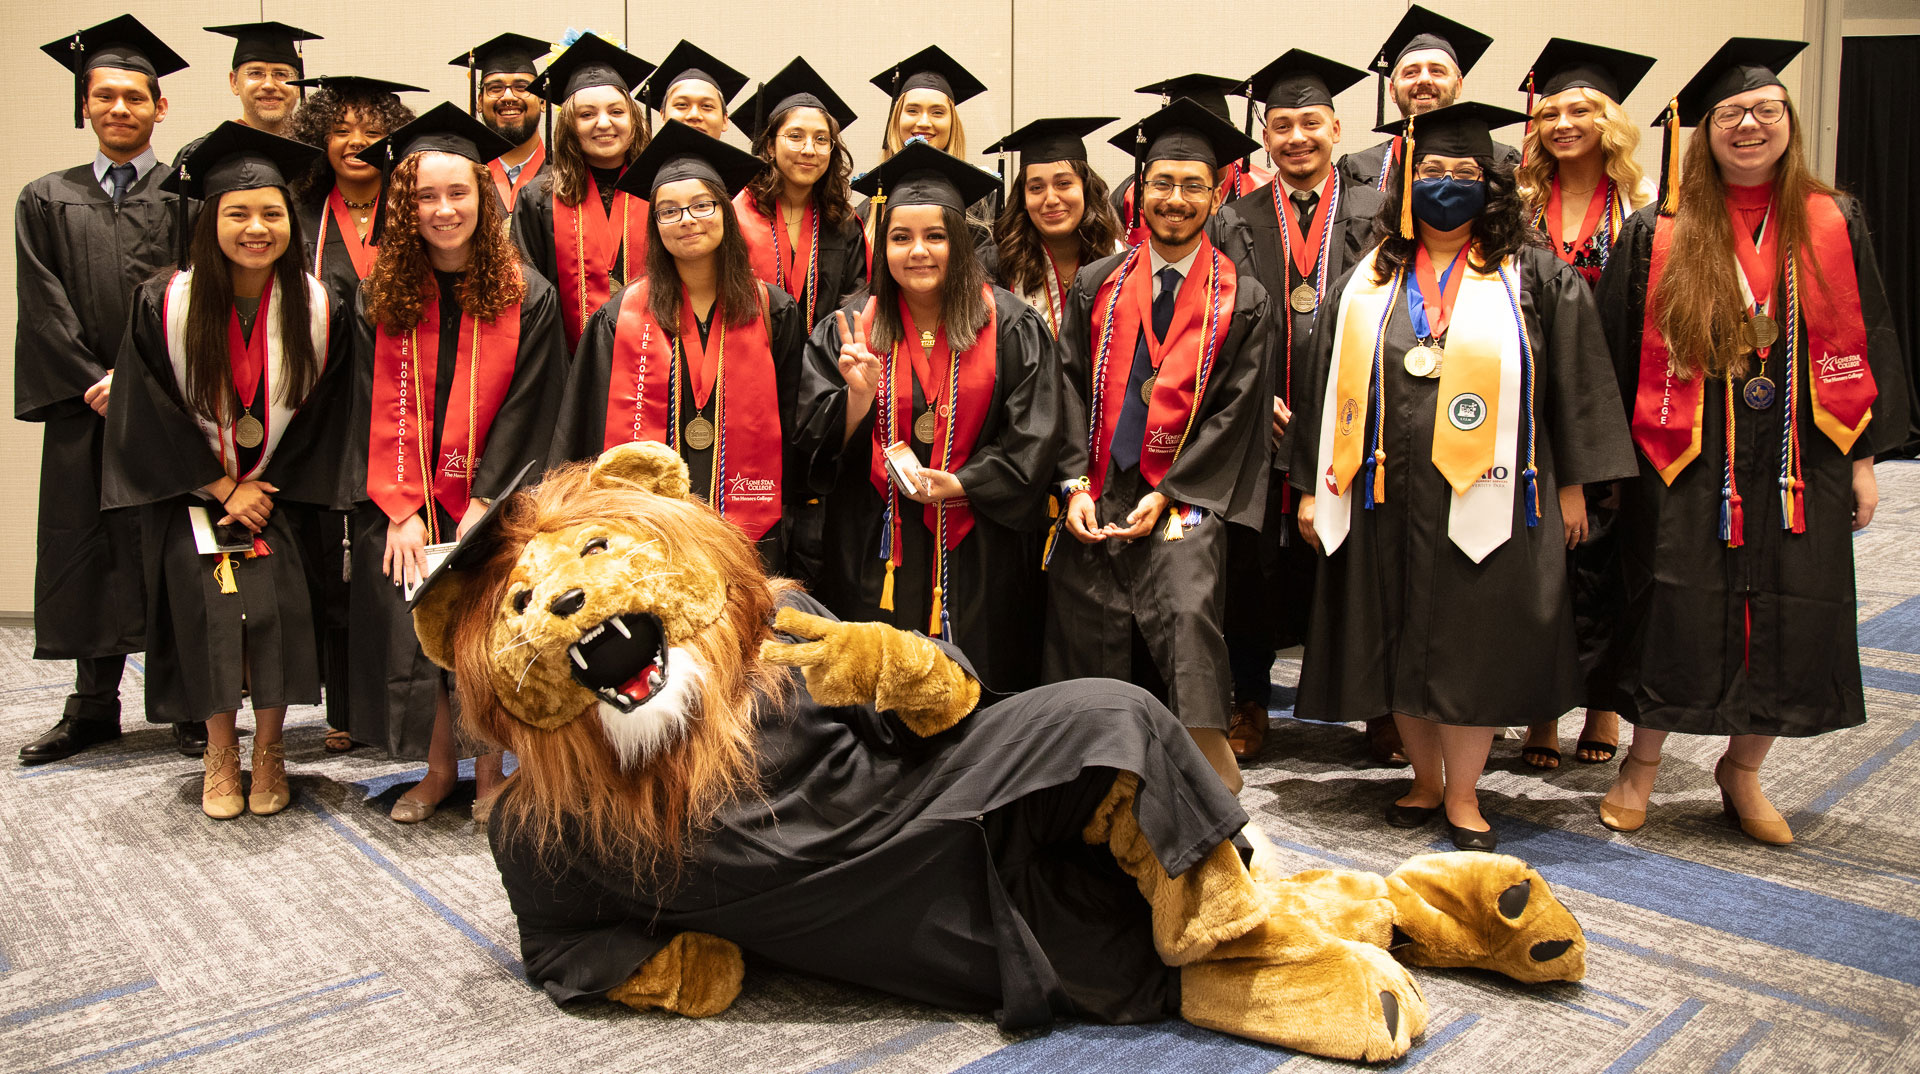 May 2022 Commencement Photo of Graduates with Leo the Mascot